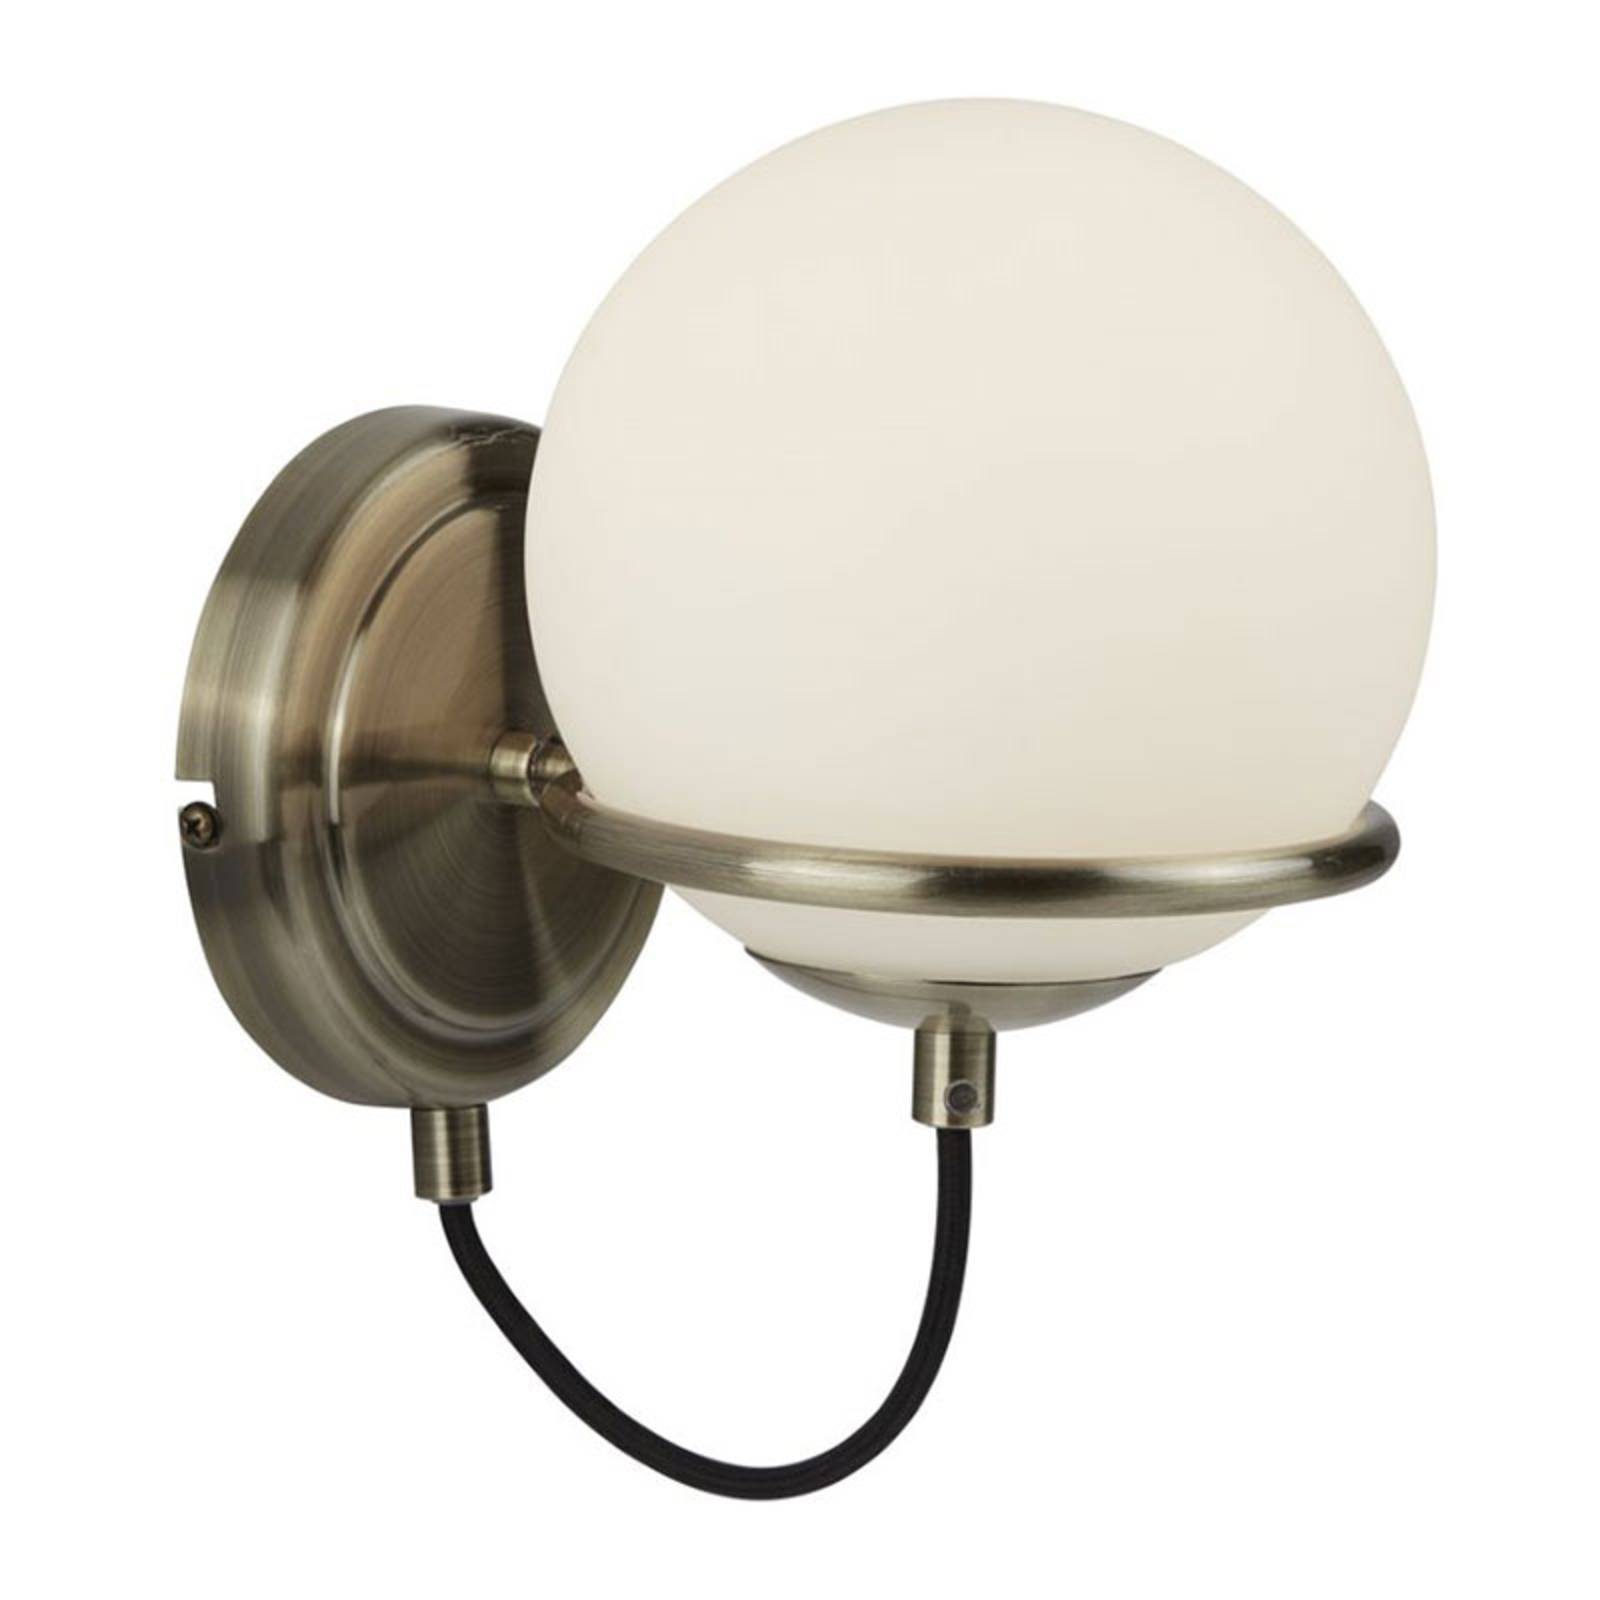 Photos - Chandelier / Lamp Searchlight Sphere wall light with a spherical glass lampshade 